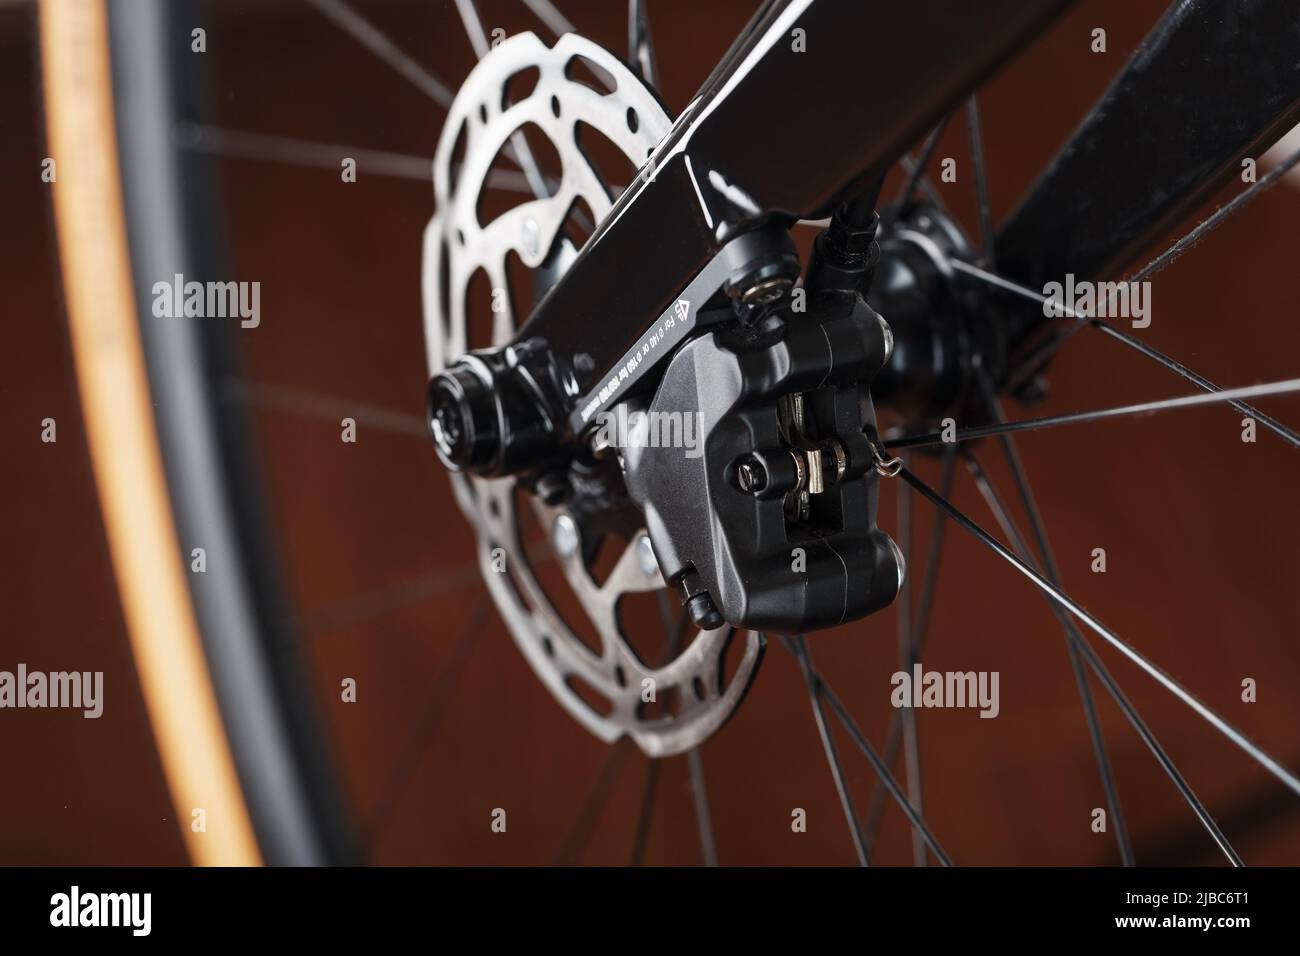 Bicycle Brake Rotor with Hydraulic Highway Braking System close-up Stock Photo